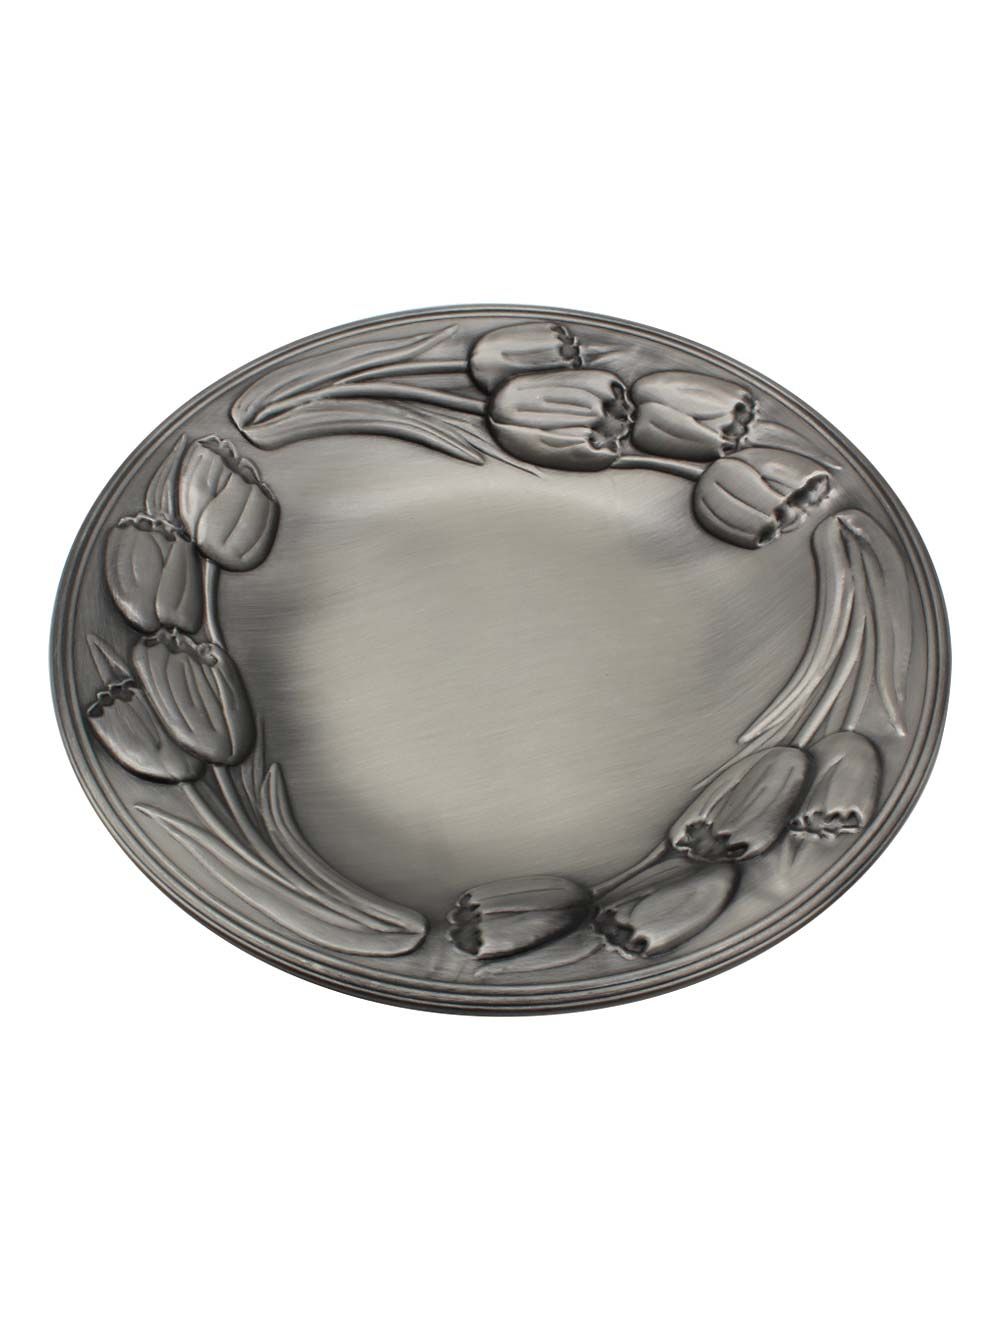 
Pewter-plated Round Tray 13